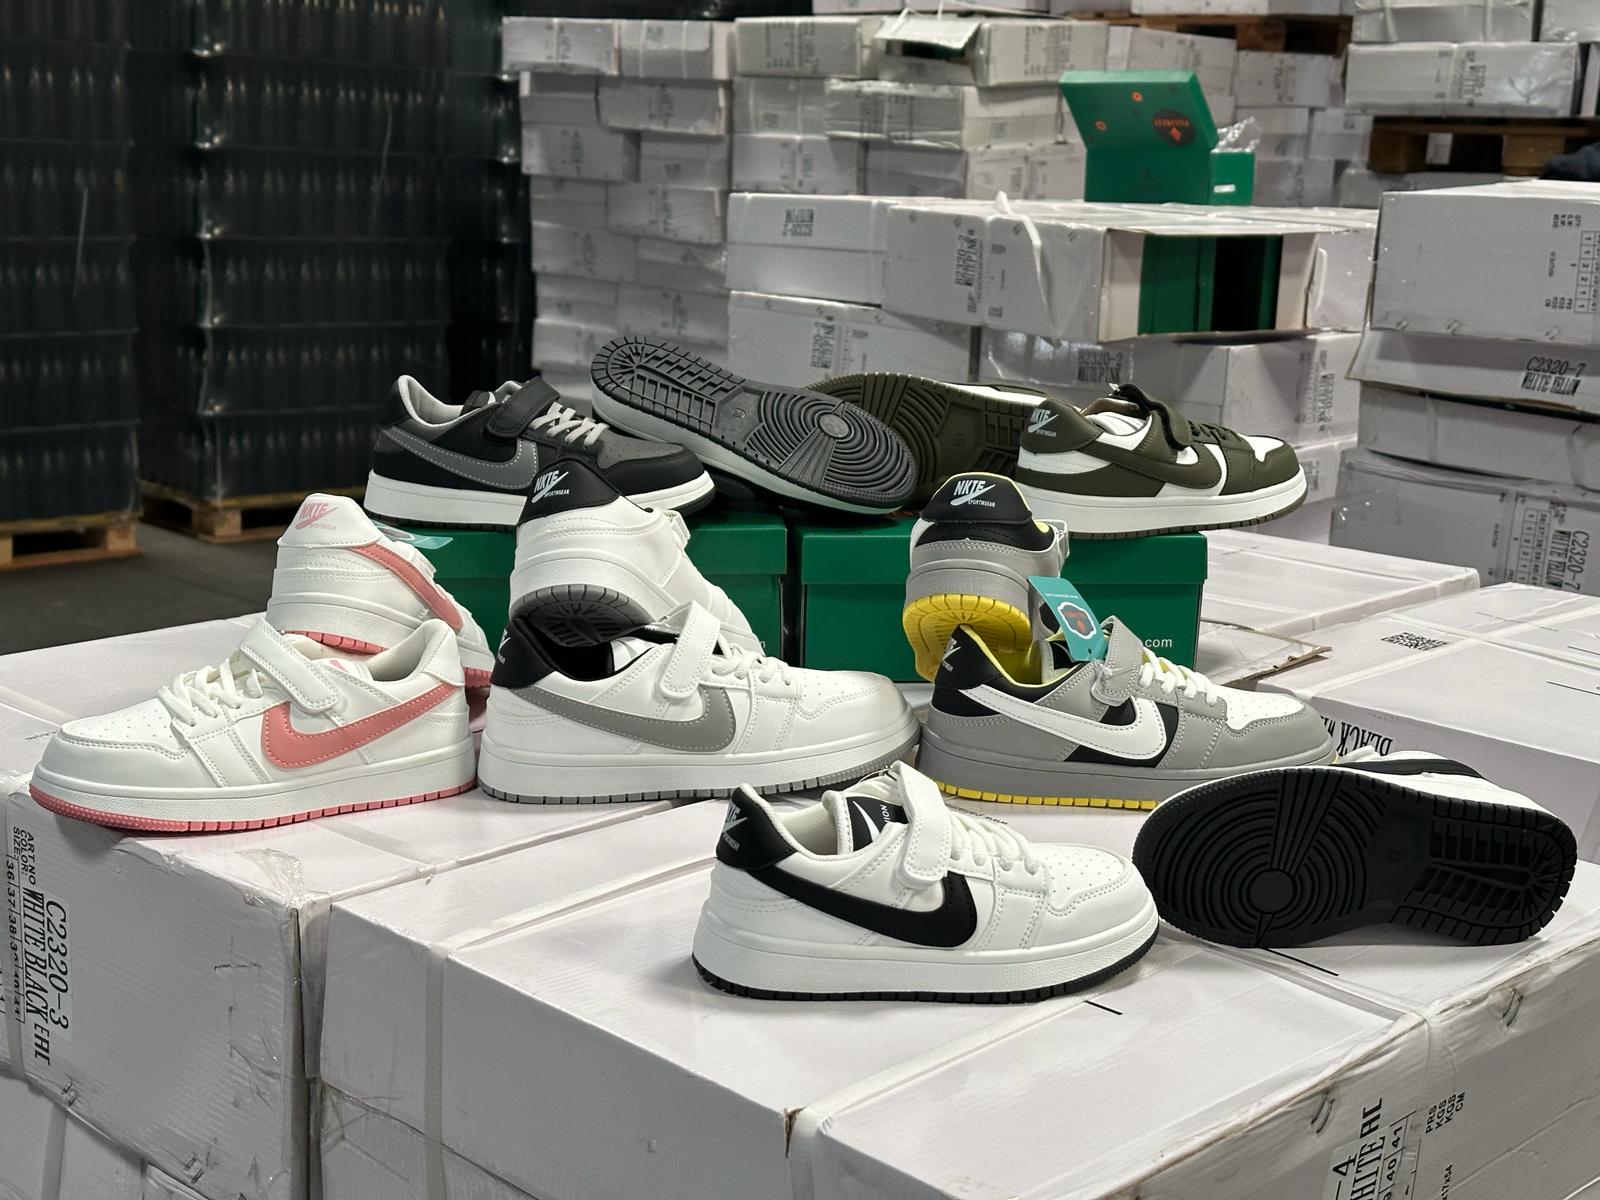 Counterfeit footwear valued at EUR 800,000 seized by Romanian customs inspectors